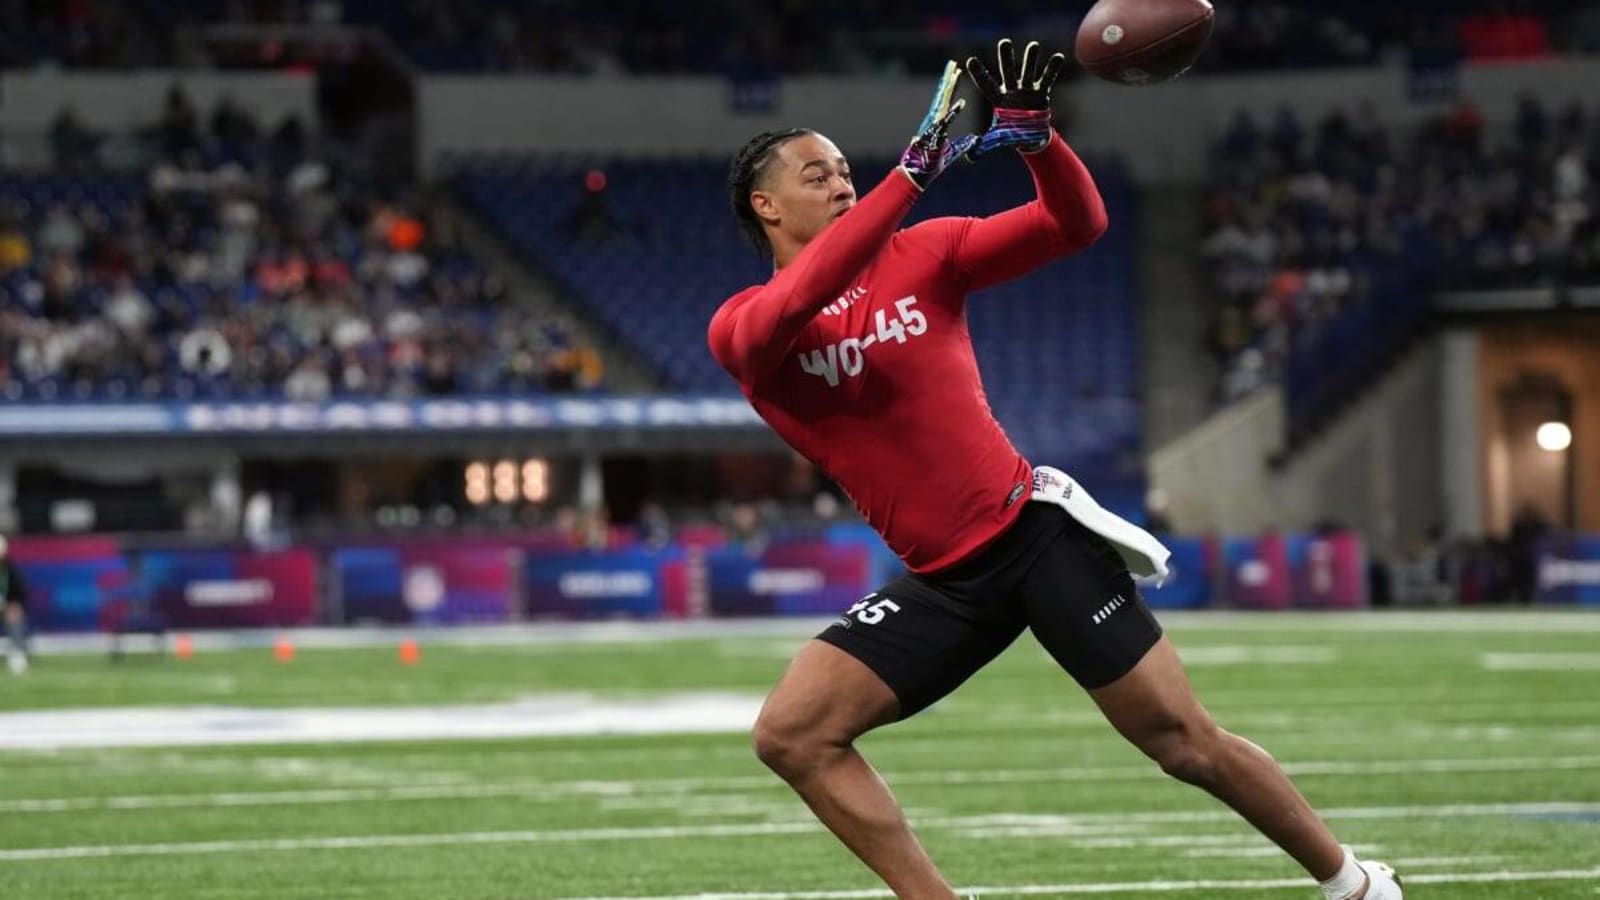 Vikings WR Coach Keenan McCardell Got a Close Look at the Draft&#39;s Top Receivers